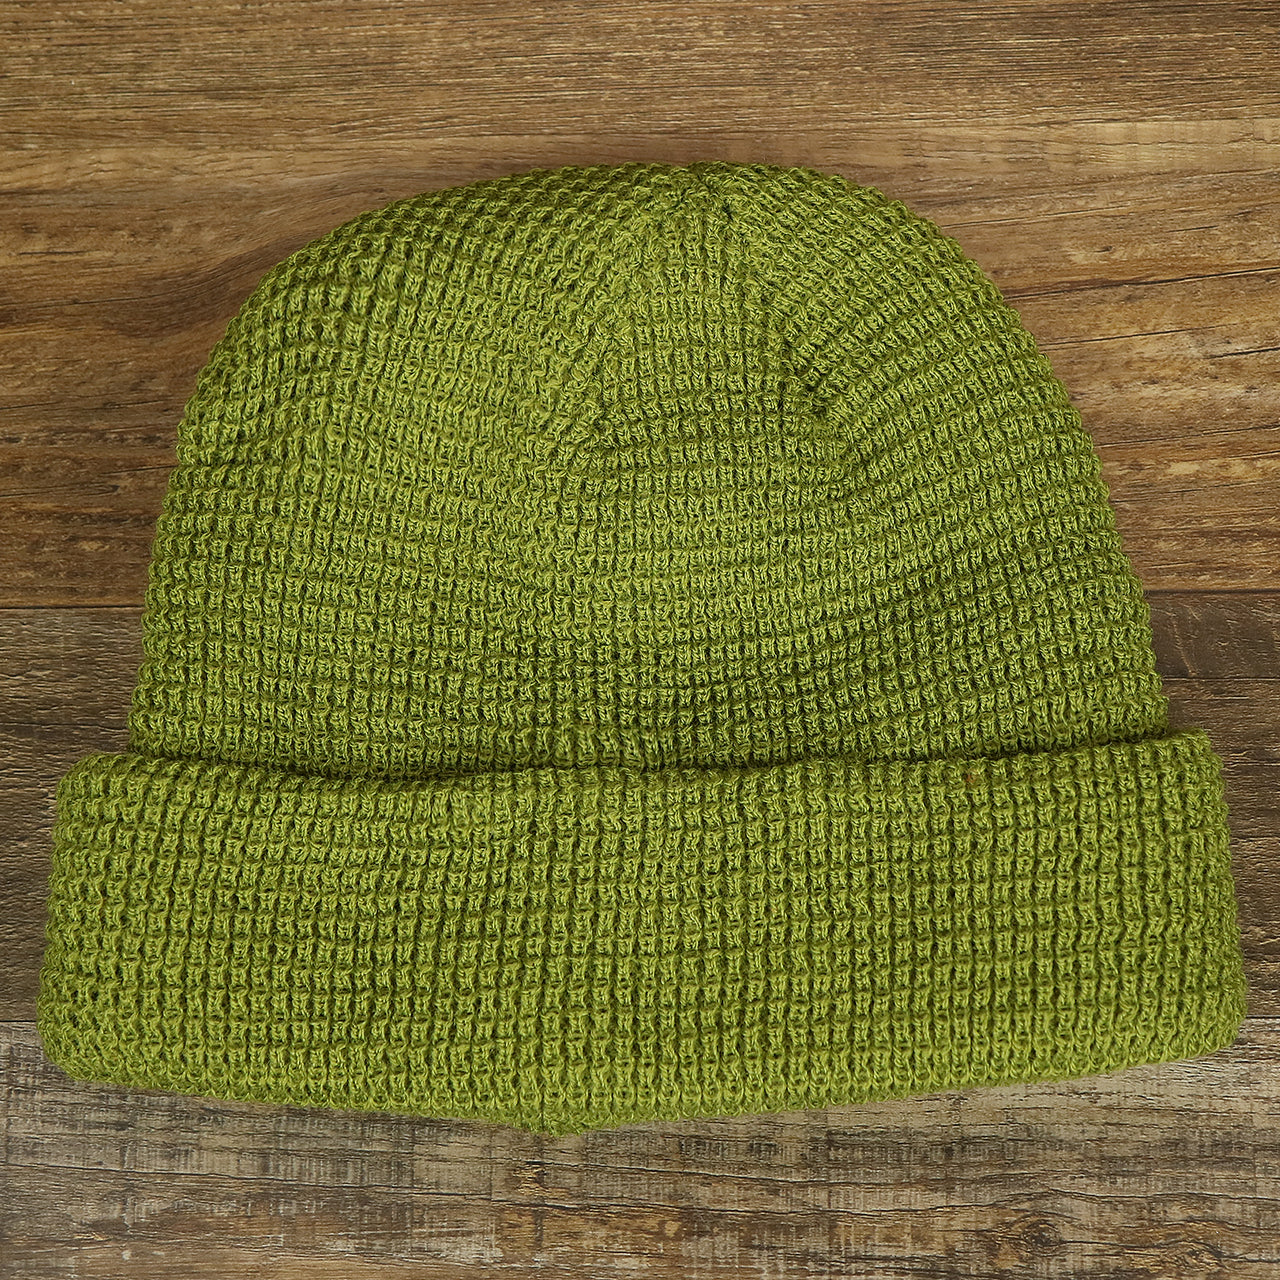 The front of the Army Green Fisherman Knit Cuffed Beanie